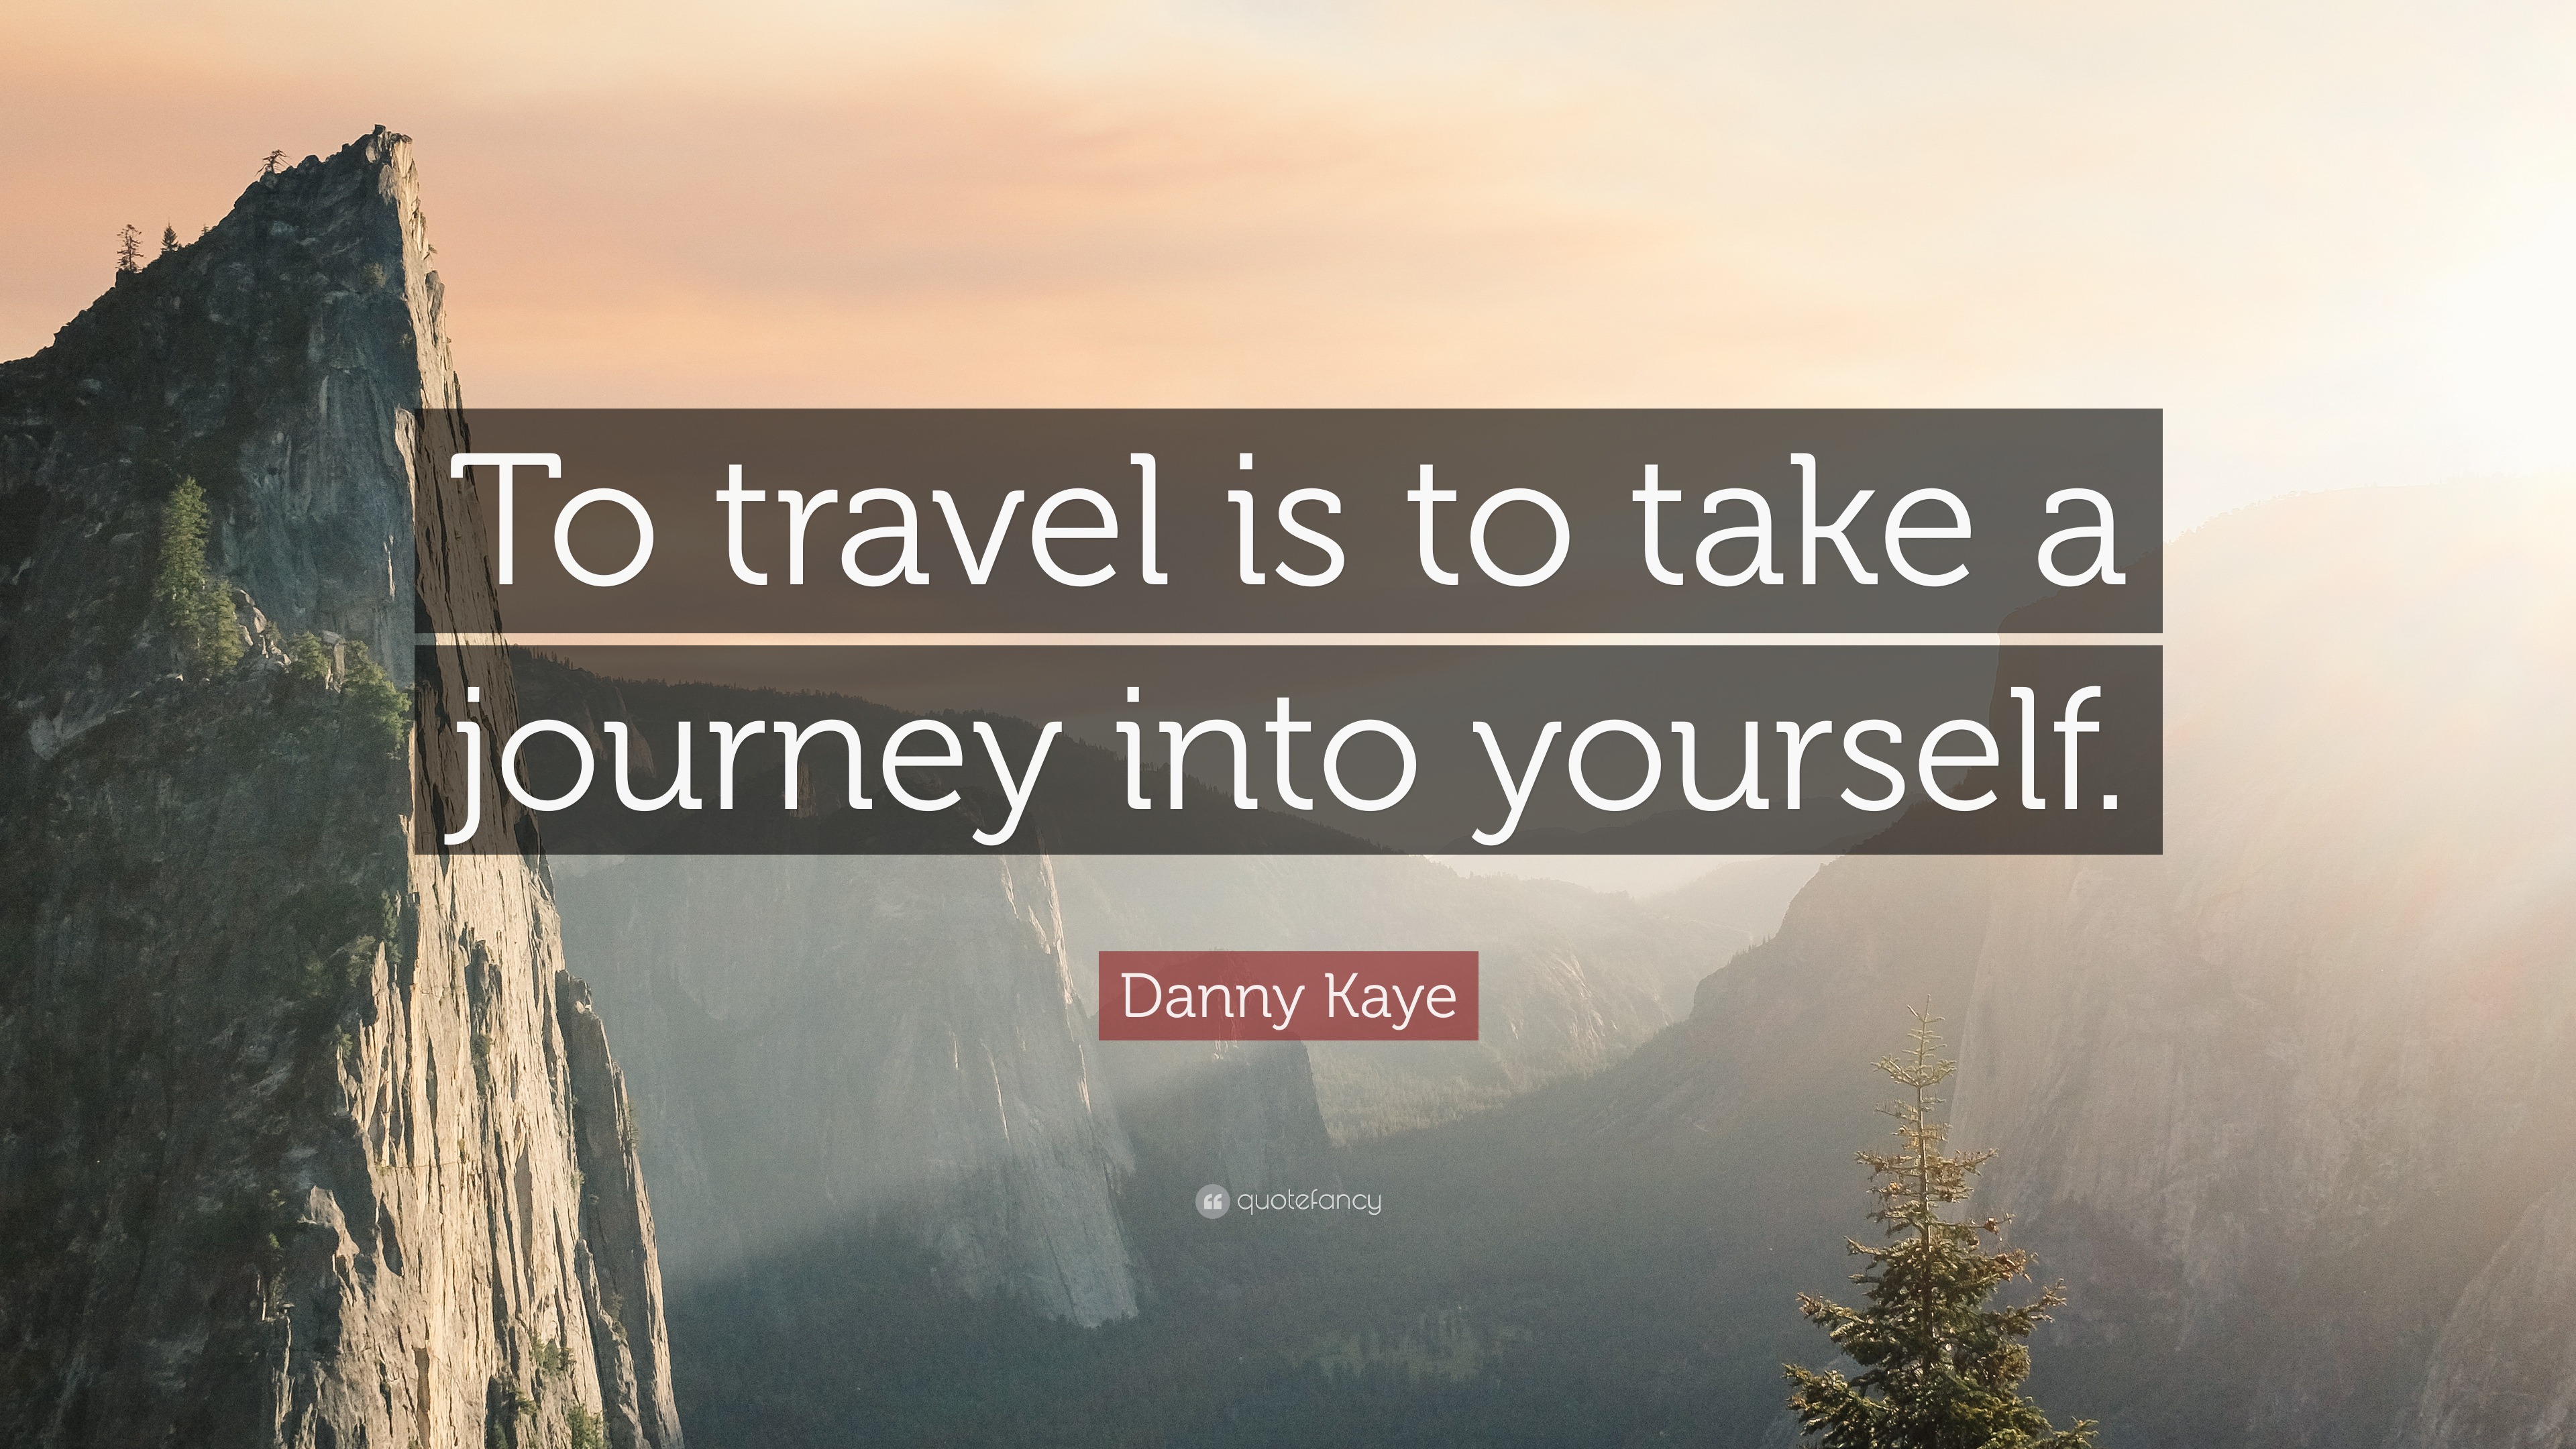 travel yourself meaning